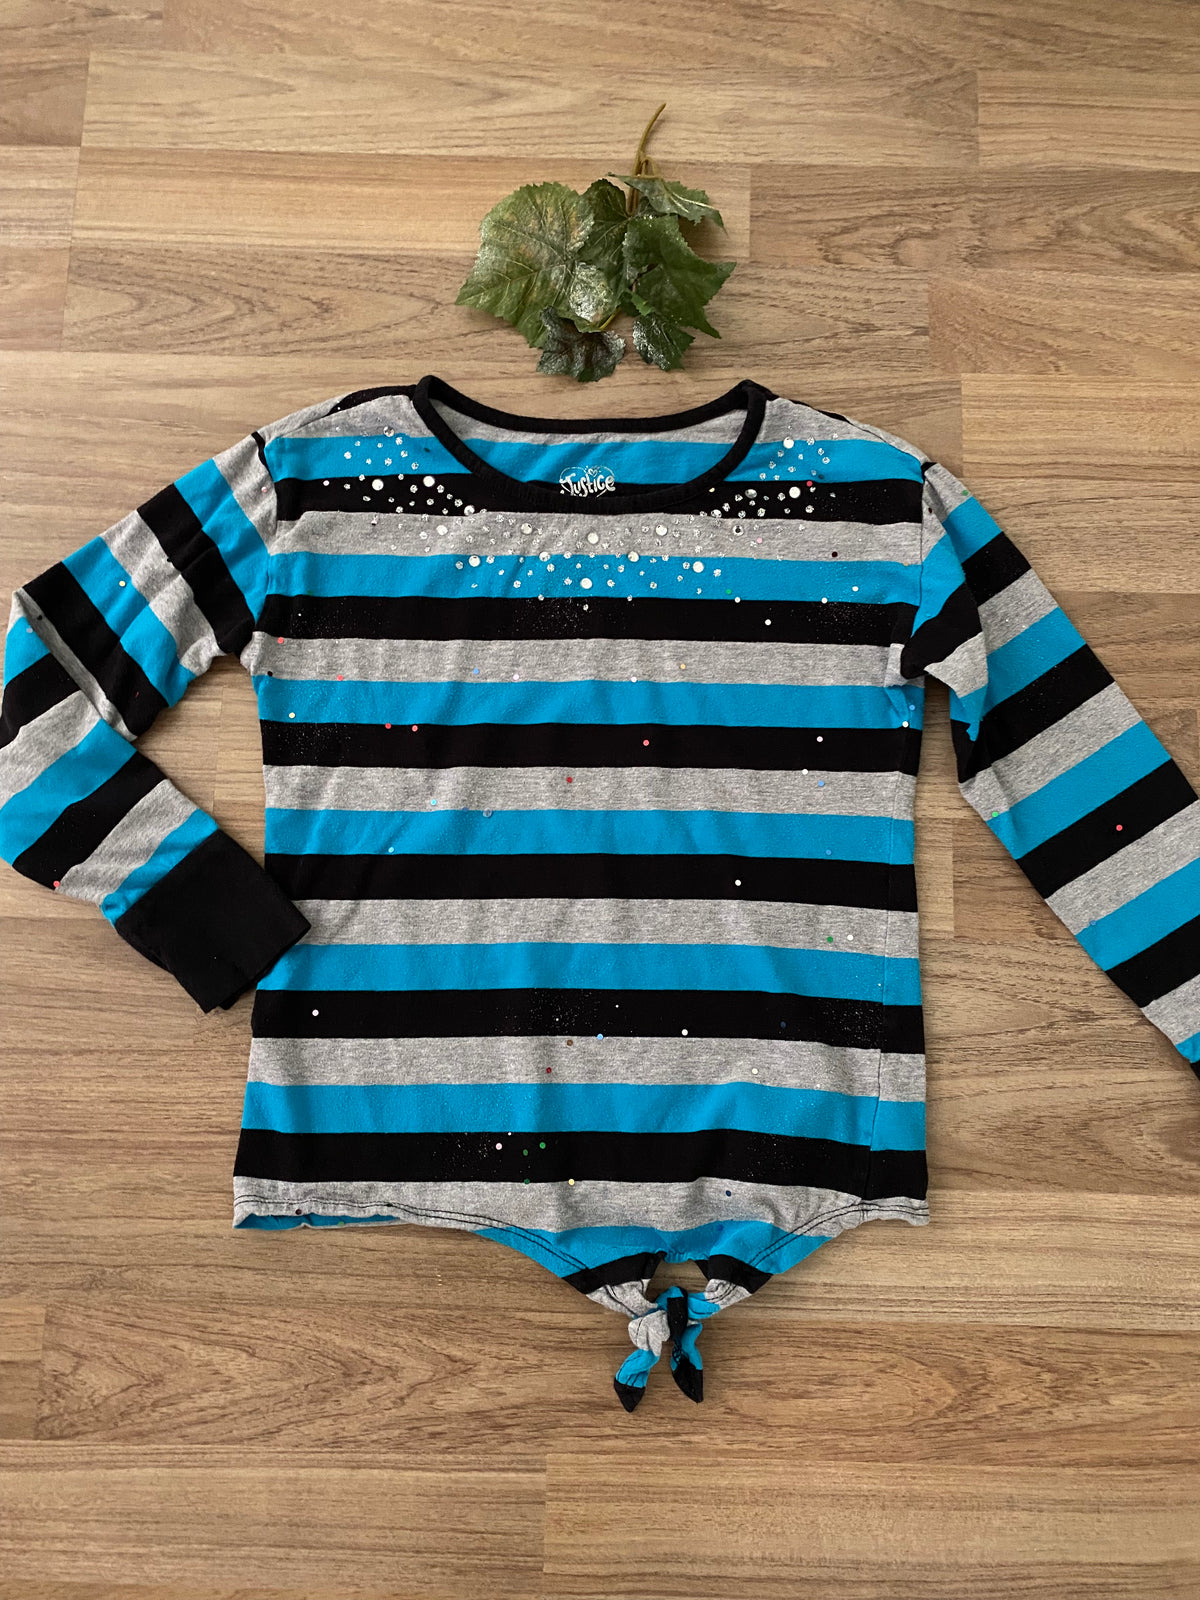 Long Sleeve Striped Top (Girls Size 8)